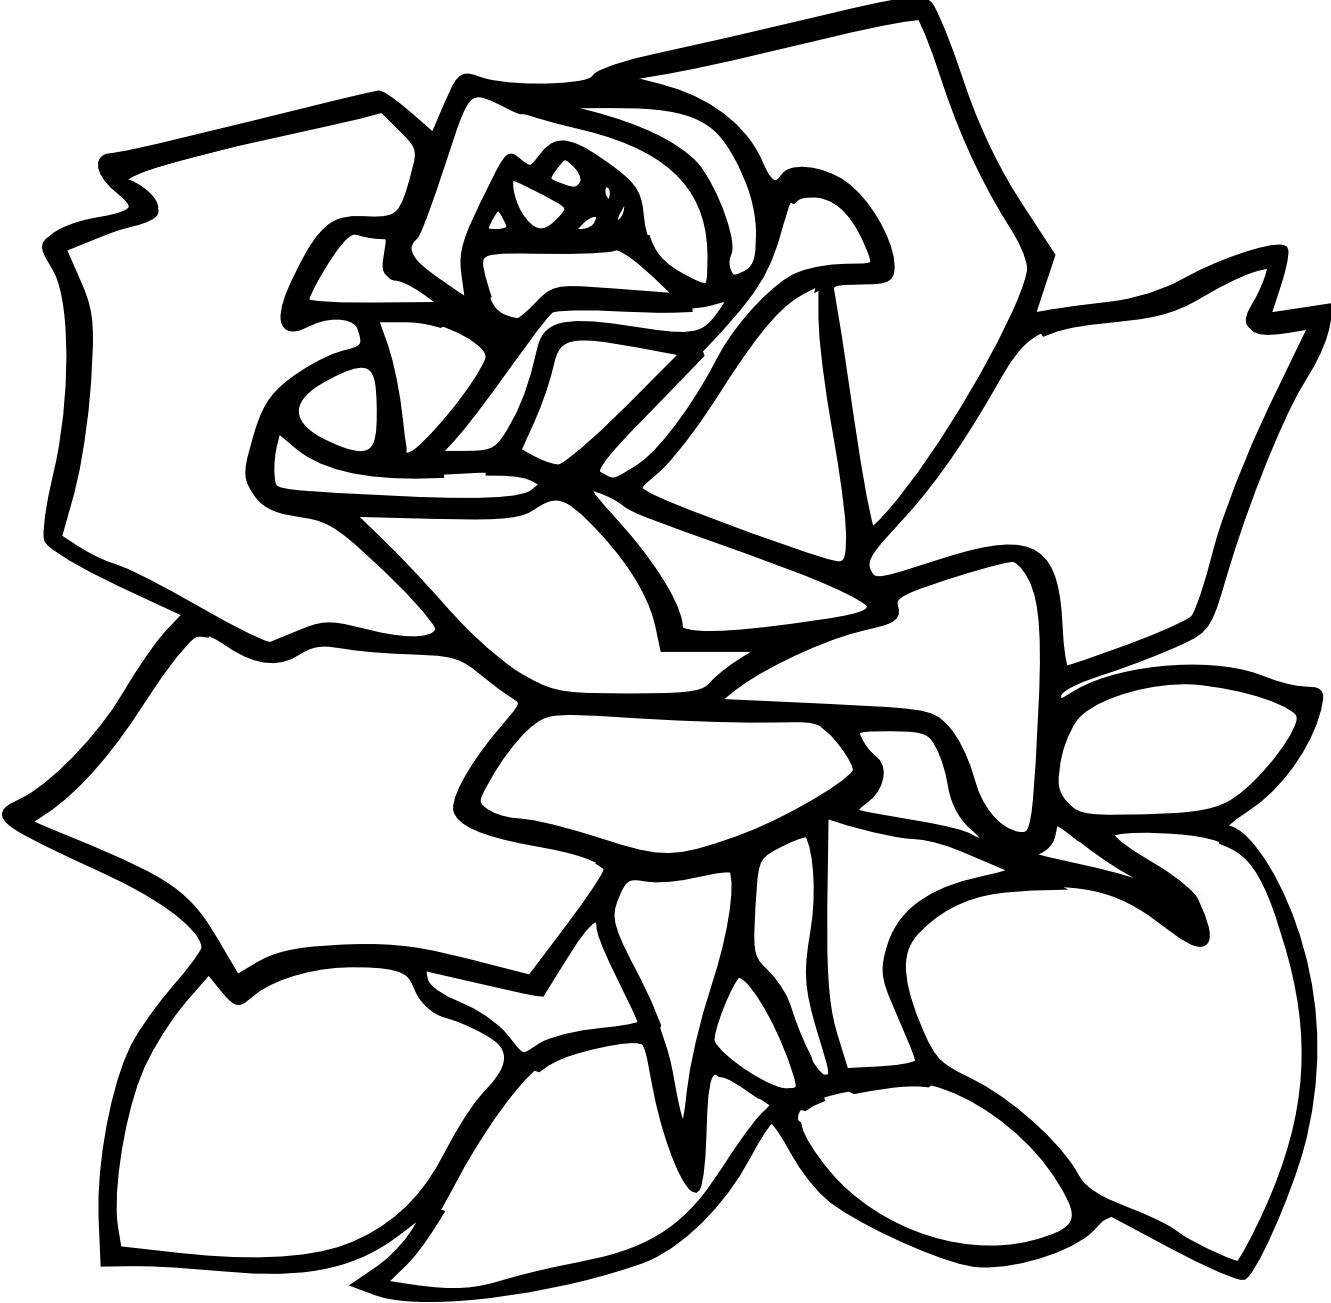 Rose Line Drawings - ClipArt Best